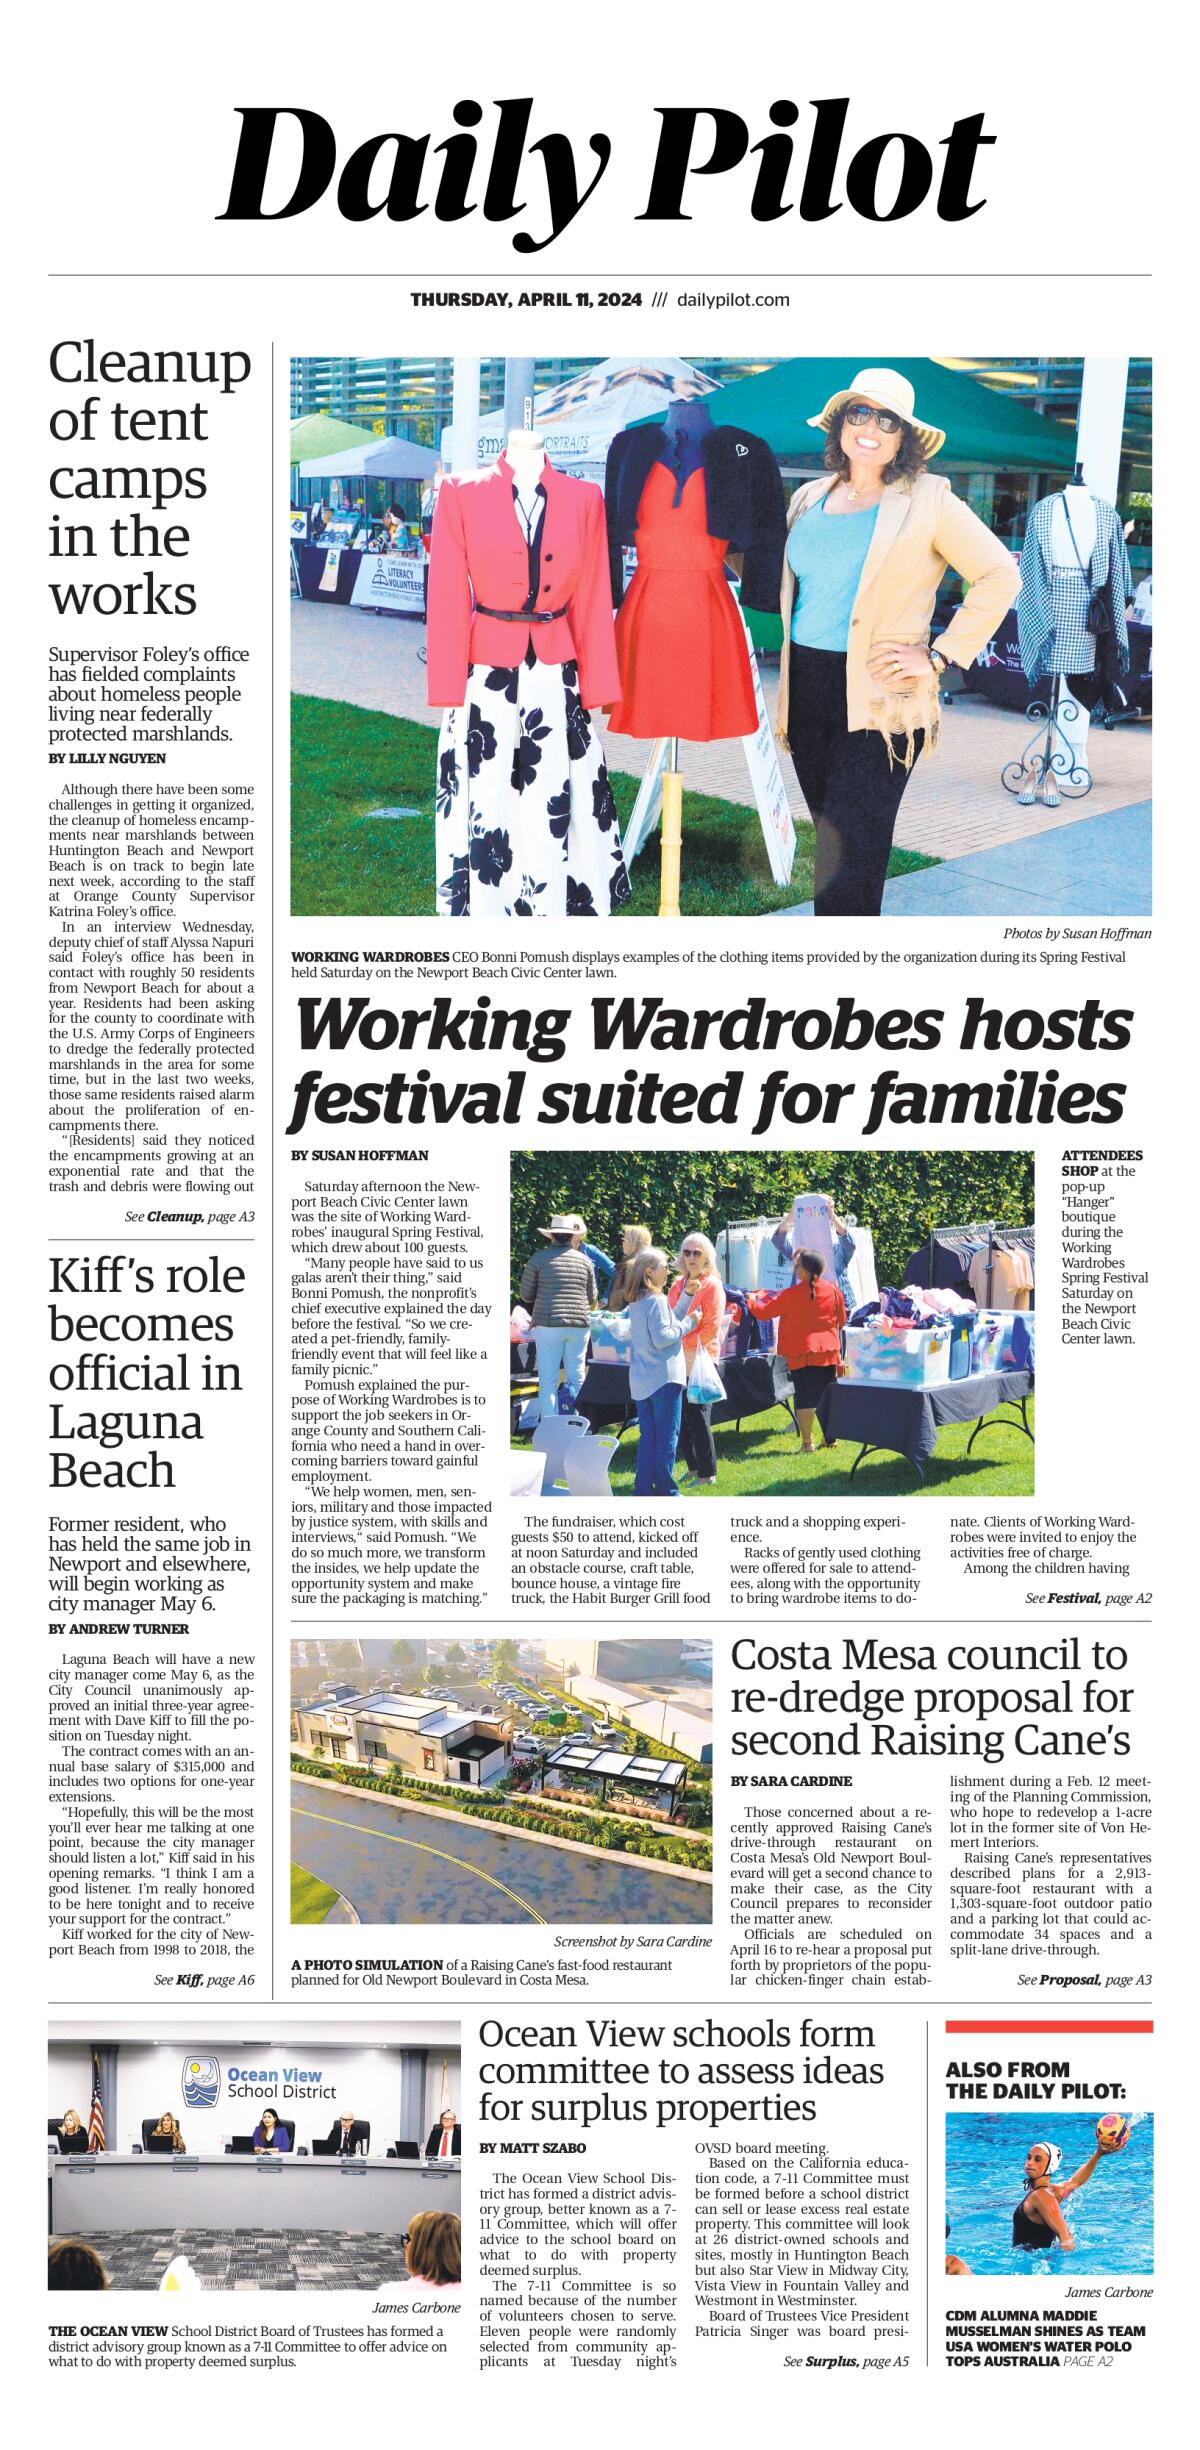 Front page of the Daily Pilot e-newspaper for Thursday, April 11, 2024.